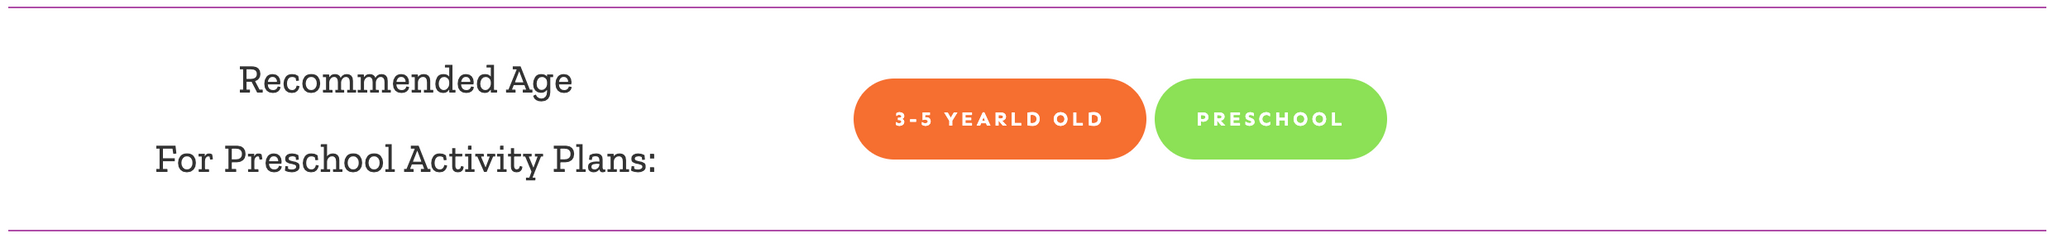 Recommended age 3-5 year old preschool